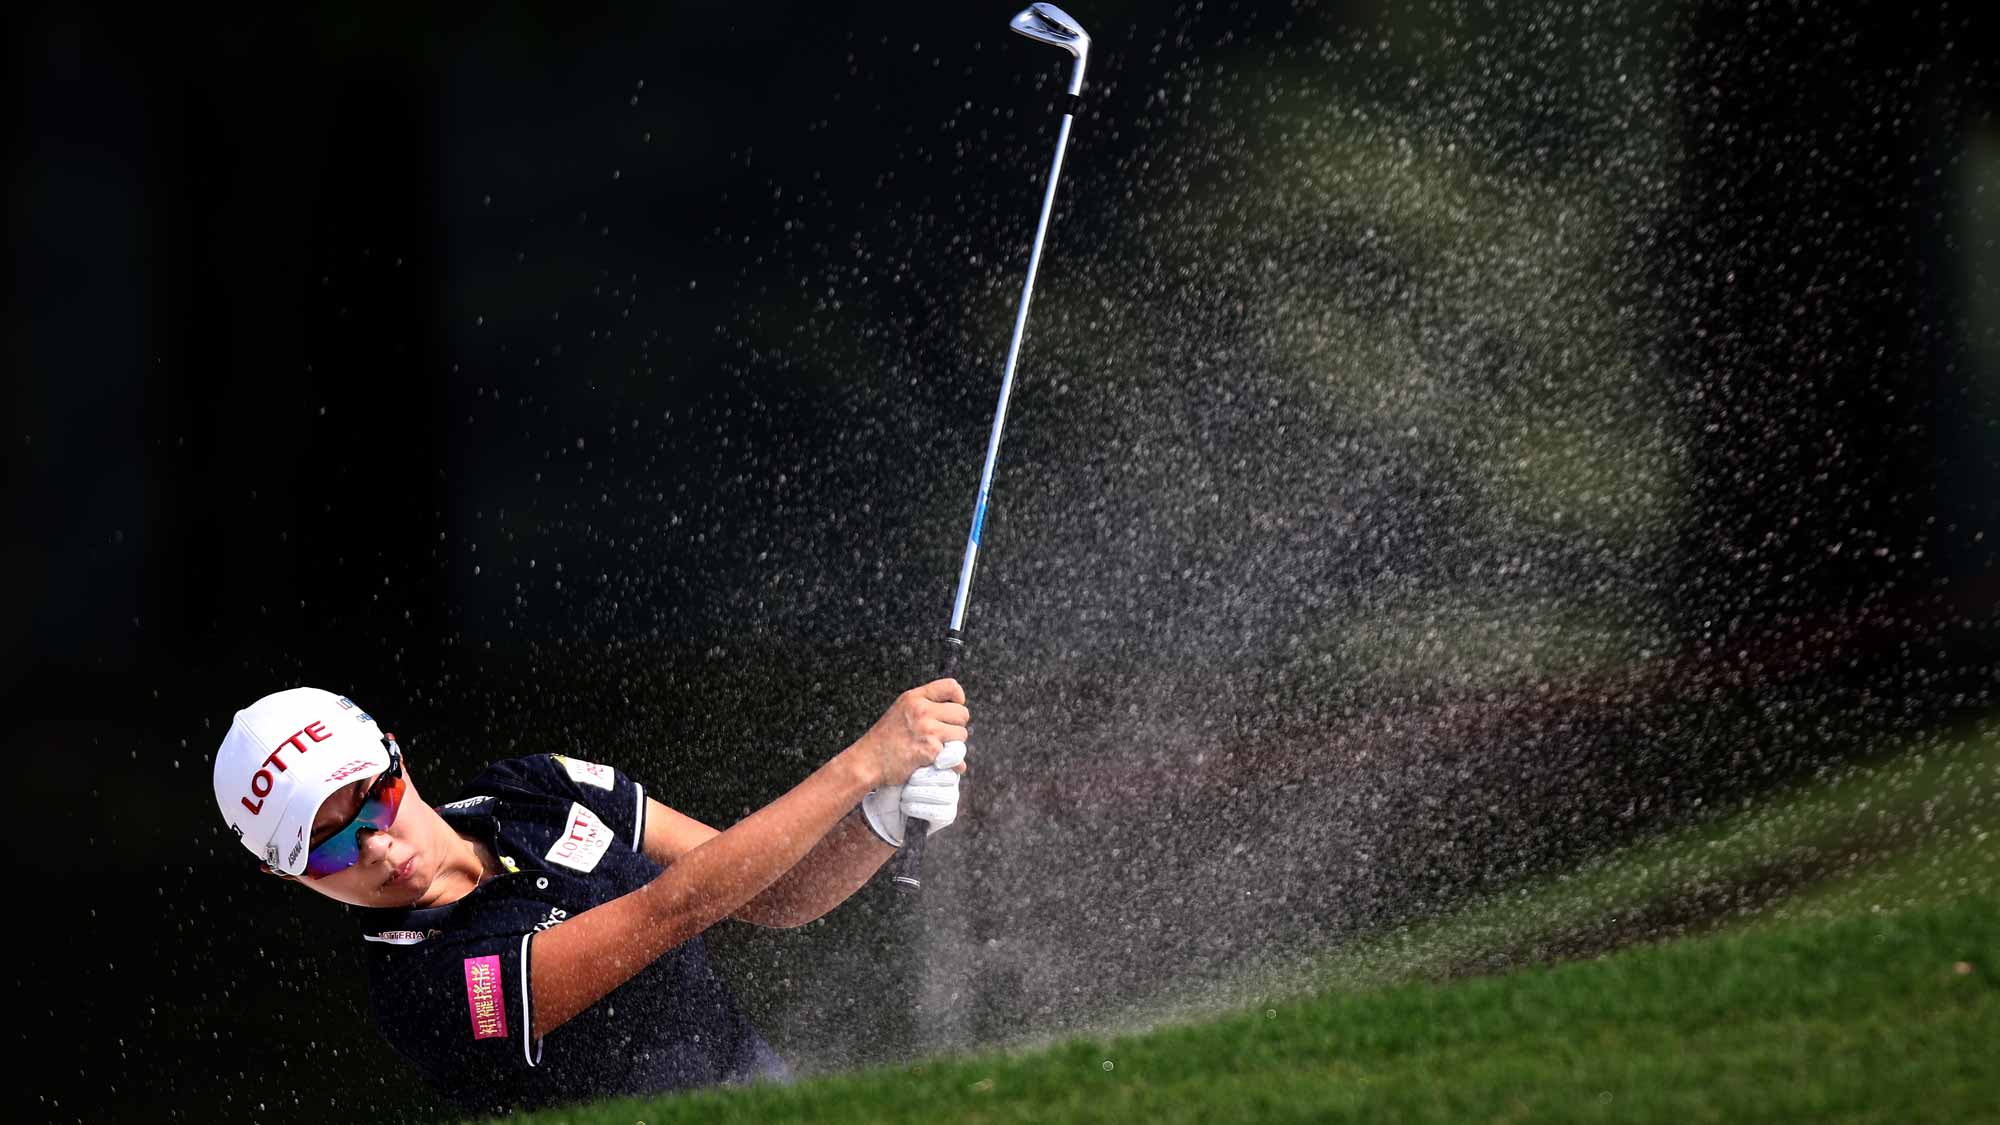 Hyo Joo Kim of South Korea plays a bunker shot on the 6th hole during round one of the Sime Darby LPGA Tour at Kuala Lumpur Golf & Country Club